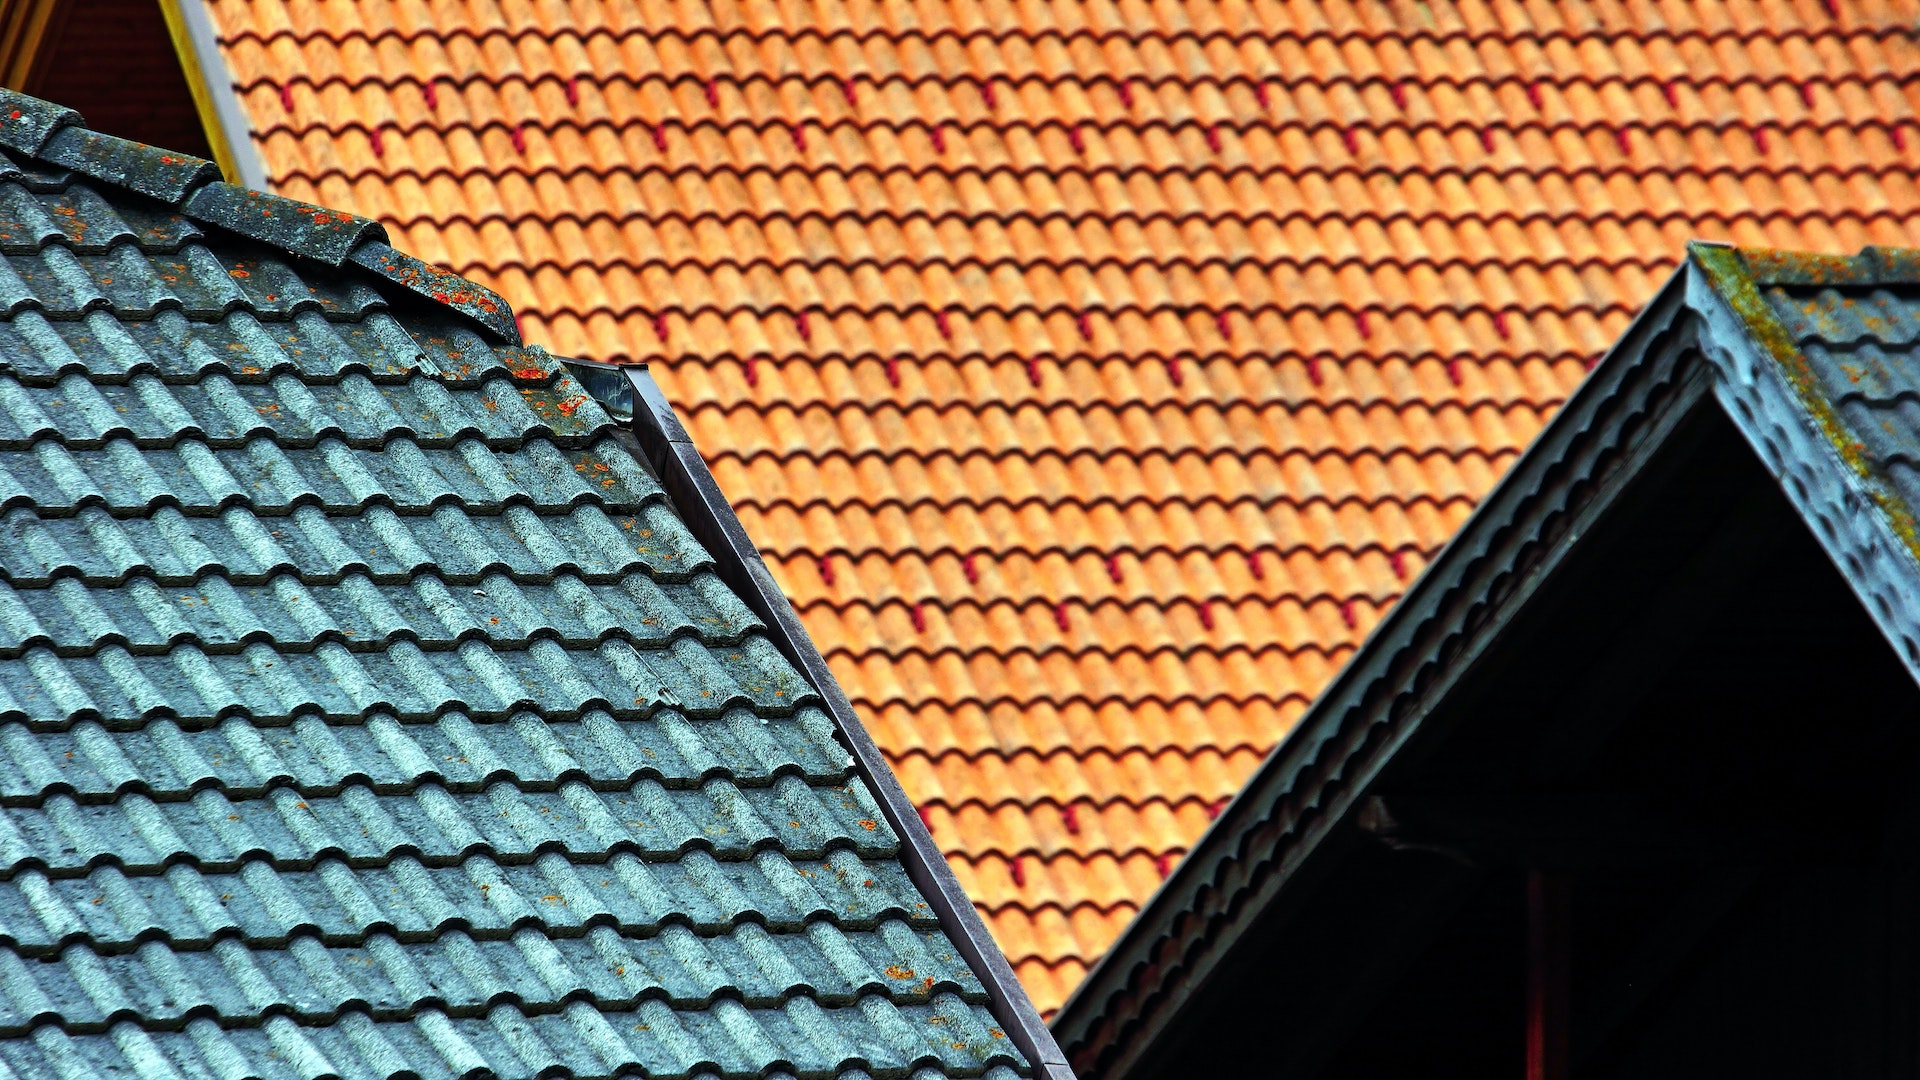 Photo of Tiled Roofs